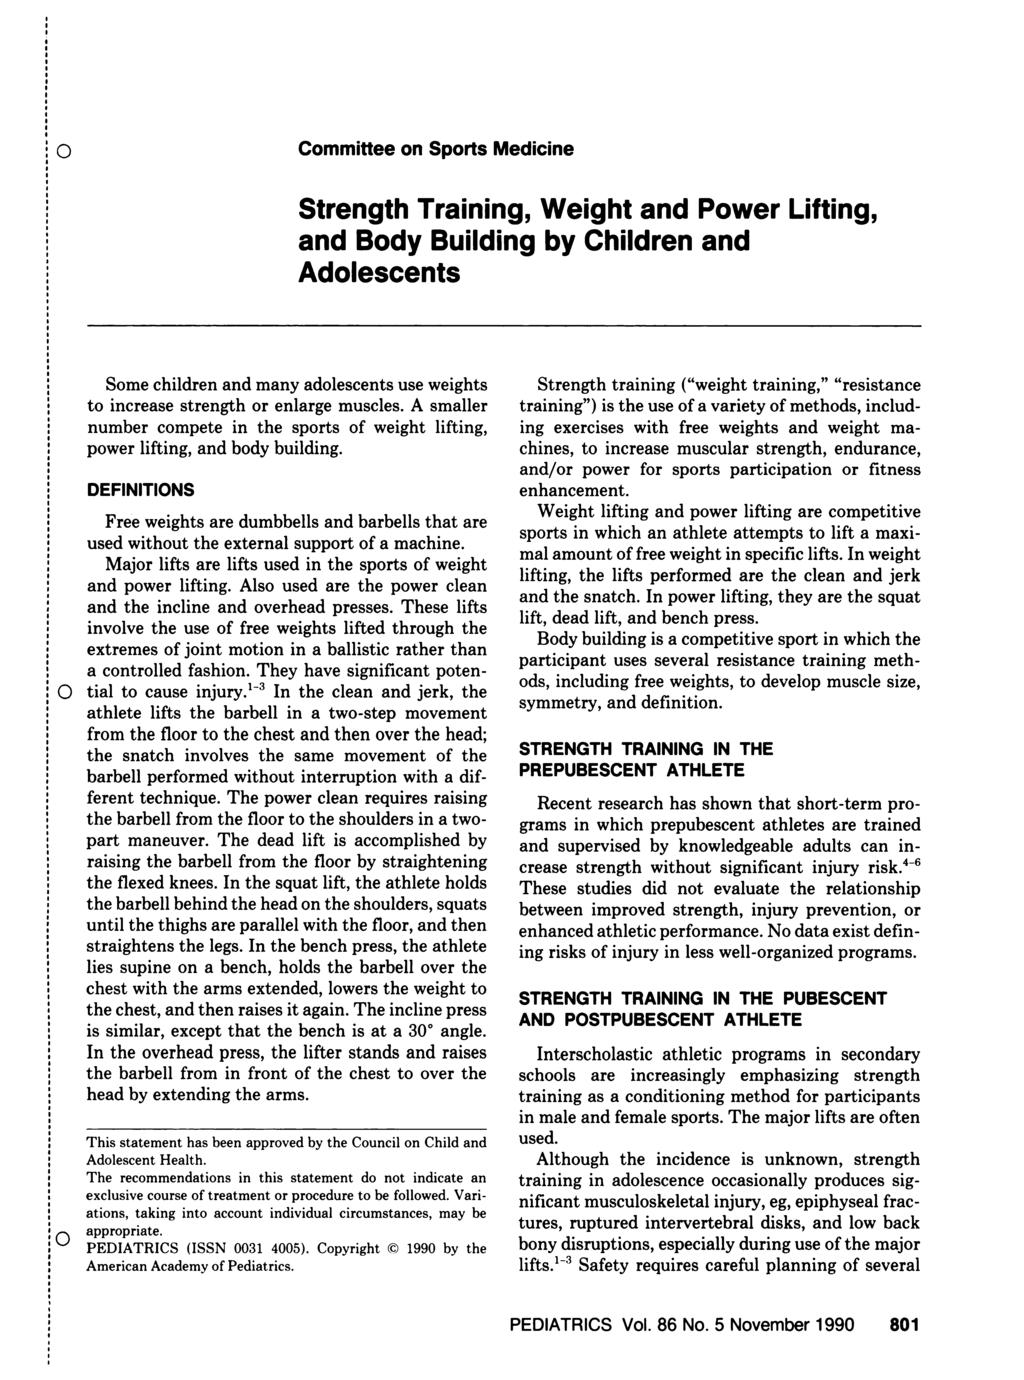 Committee on Sports Medicine Strength Training, Weight and Power Lifting, and Body Building by Children and Some children and many adolescents use weights to increase strength or enlarge muscles.